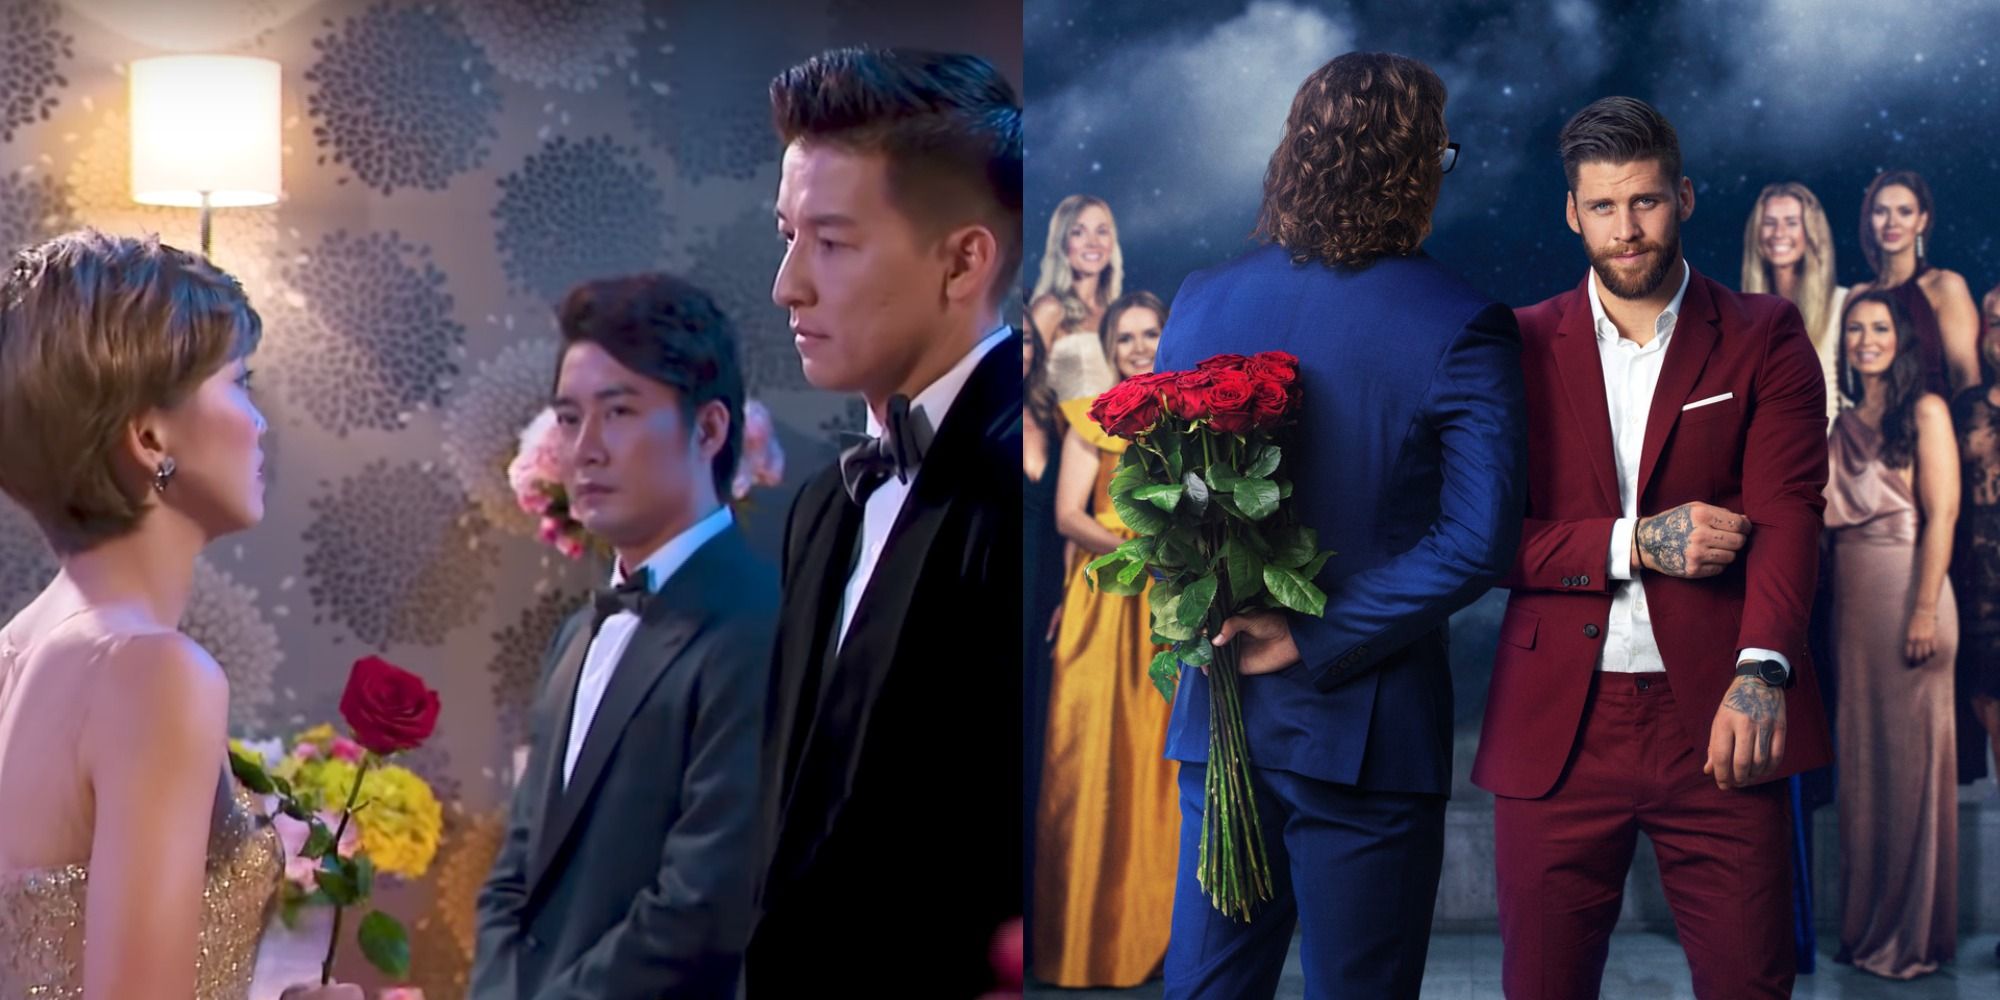 Split image of The Bachelor Vietnam and The Bachelor Norway/Sweden